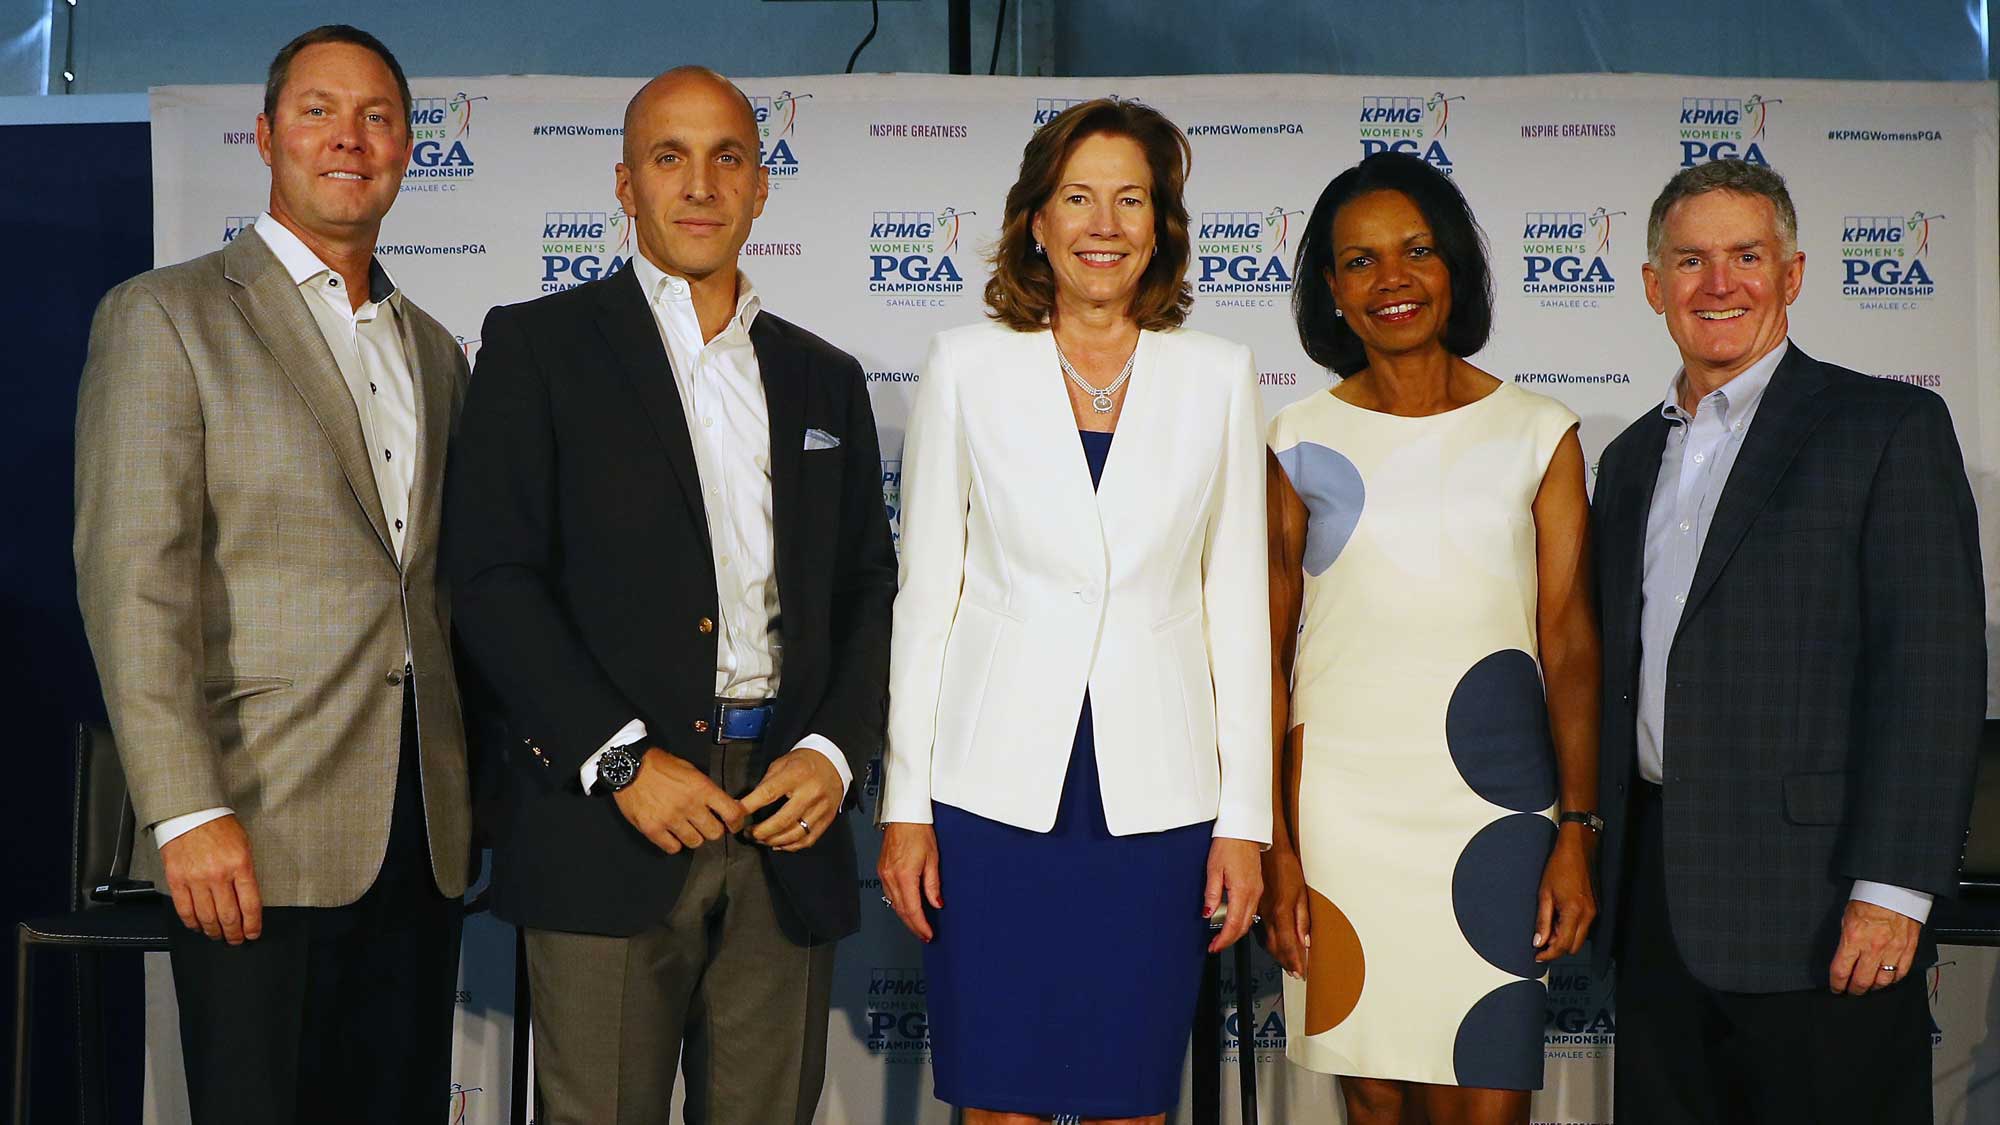 (L-R) Mike Whan, LPGA Commissioner, Peter Bevacqua, CEO of the PGA of America, Lynne Doughtie, U.S. Chairman and CEO of KPMG, former Secretary of State Condoleezza Rice and John Veihmeyer, Chairman KPMG International greet the media prior to the start of the KPMG Women's PGA Championship